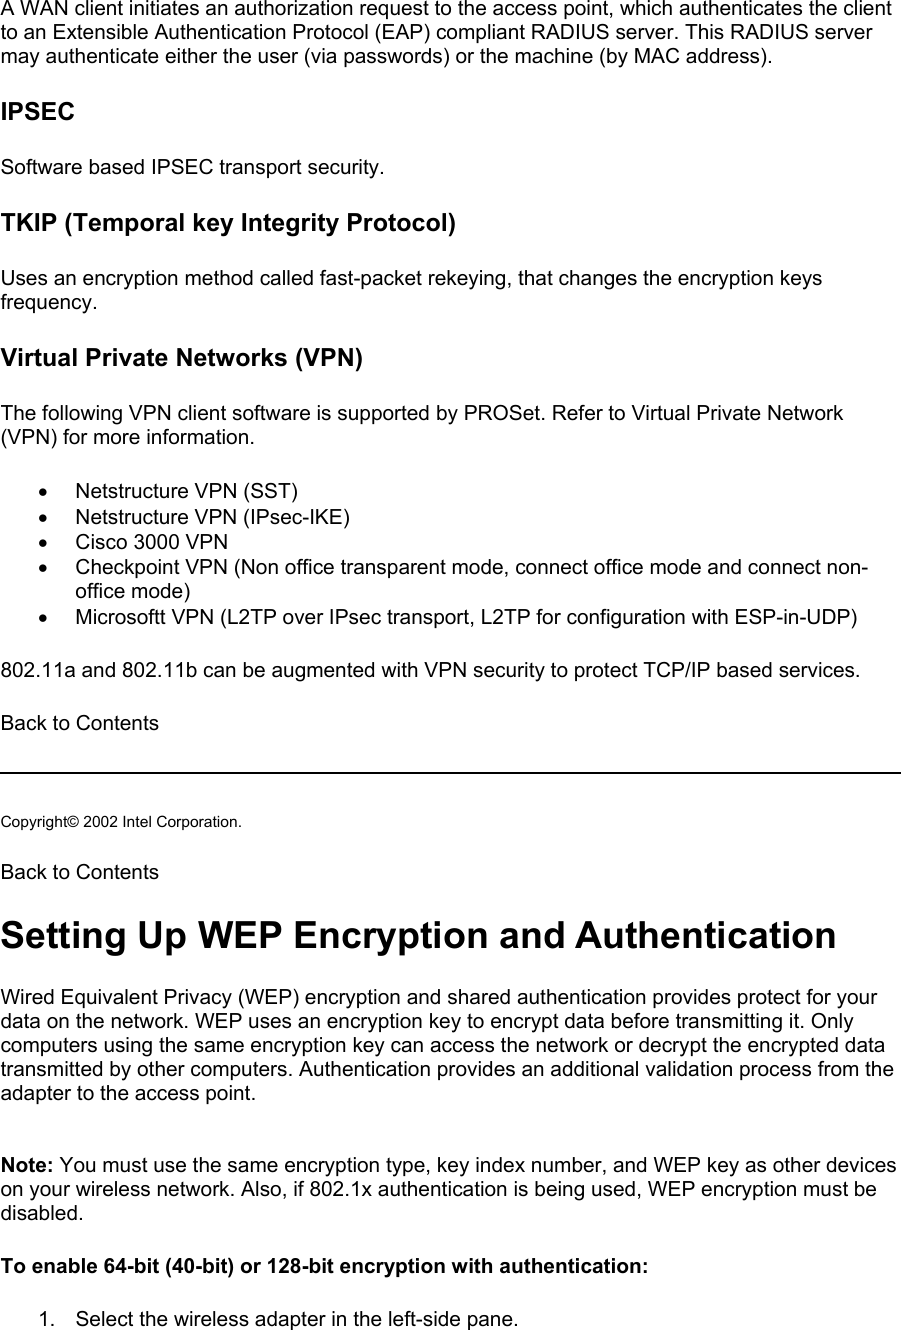 A WAN client initiates an authorization request to the access point, which authenticates the client to an Extensible Authentication Protocol (EAP) compliant RADIUS server. This RADIUS server may authenticate either the user (via passwords) or the machine (by MAC address).   IPSEC Software based IPSEC transport security.  TKIP (Temporal key Integrity Protocol) Uses an encryption method called fast-packet rekeying, that changes the encryption keys frequency.  Virtual Private Networks (VPN) The following VPN client software is supported by PROSet. Refer to Virtual Private Network (VPN) for more information.  •  Netstructure VPN (SST) •  Netstructure VPN (IPsec-IKE) •  Cisco 3000 VPN •  Checkpoint VPN (Non office transparent mode, connect office mode and connect non-office mode) •  Microsoftt VPN (L2TP over IPsec transport, L2TP for configuration with ESP-in-UDP) 802.11a and 802.11b can be augmented with VPN security to protect TCP/IP based services.   Back to Contents   Copyright© 2002 Intel Corporation.  Back to Contents  Setting Up WEP Encryption and Authentication Wired Equivalent Privacy (WEP) encryption and shared authentication provides protect for your data on the network. WEP uses an encryption key to encrypt data before transmitting it. Only computers using the same encryption key can access the network or decrypt the encrypted data transmitted by other computers. Authentication provides an additional validation process from the adapter to the access point.   Note: You must use the same encryption type, key index number, and WEP key as other devices on your wireless network. Also, if 802.1x authentication is being used, WEP encryption must be disabled.  To enable 64-bit (40-bit) or 128-bit encryption with authentication: 1.  Select the wireless adapter in the left-side pane. 